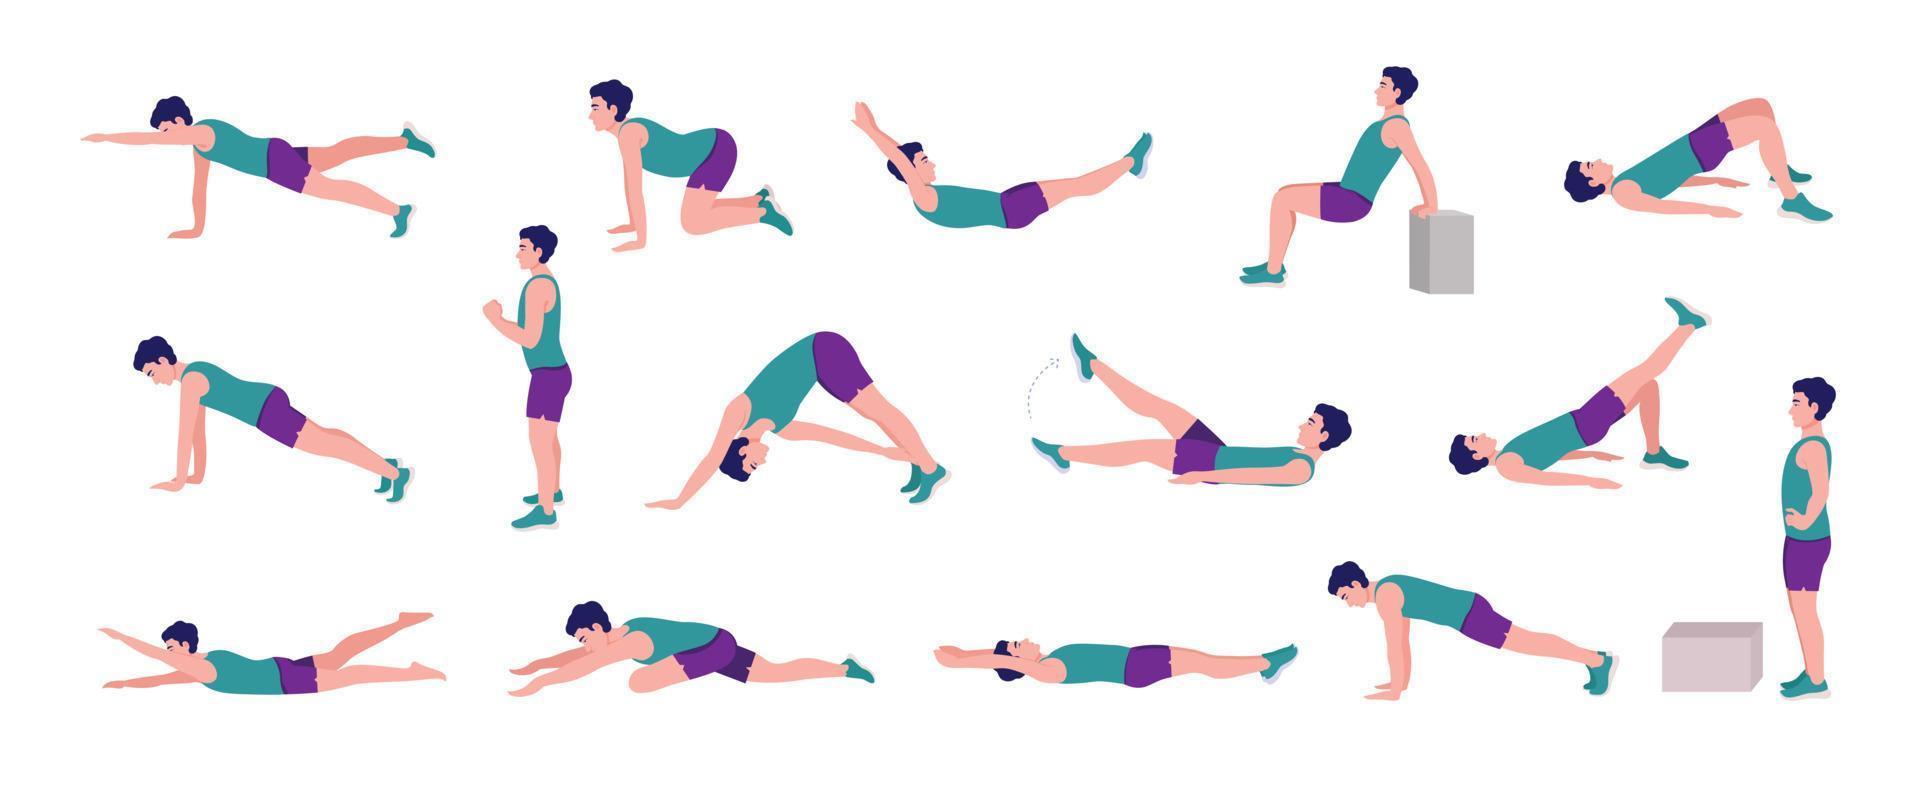 Workout Men set. Men doing fitness and yoga exercises. Lunges and squats, plank,Push Up,Mountain Climber, V-up,Bird Dog, Crunches and abc. Full body workout vector